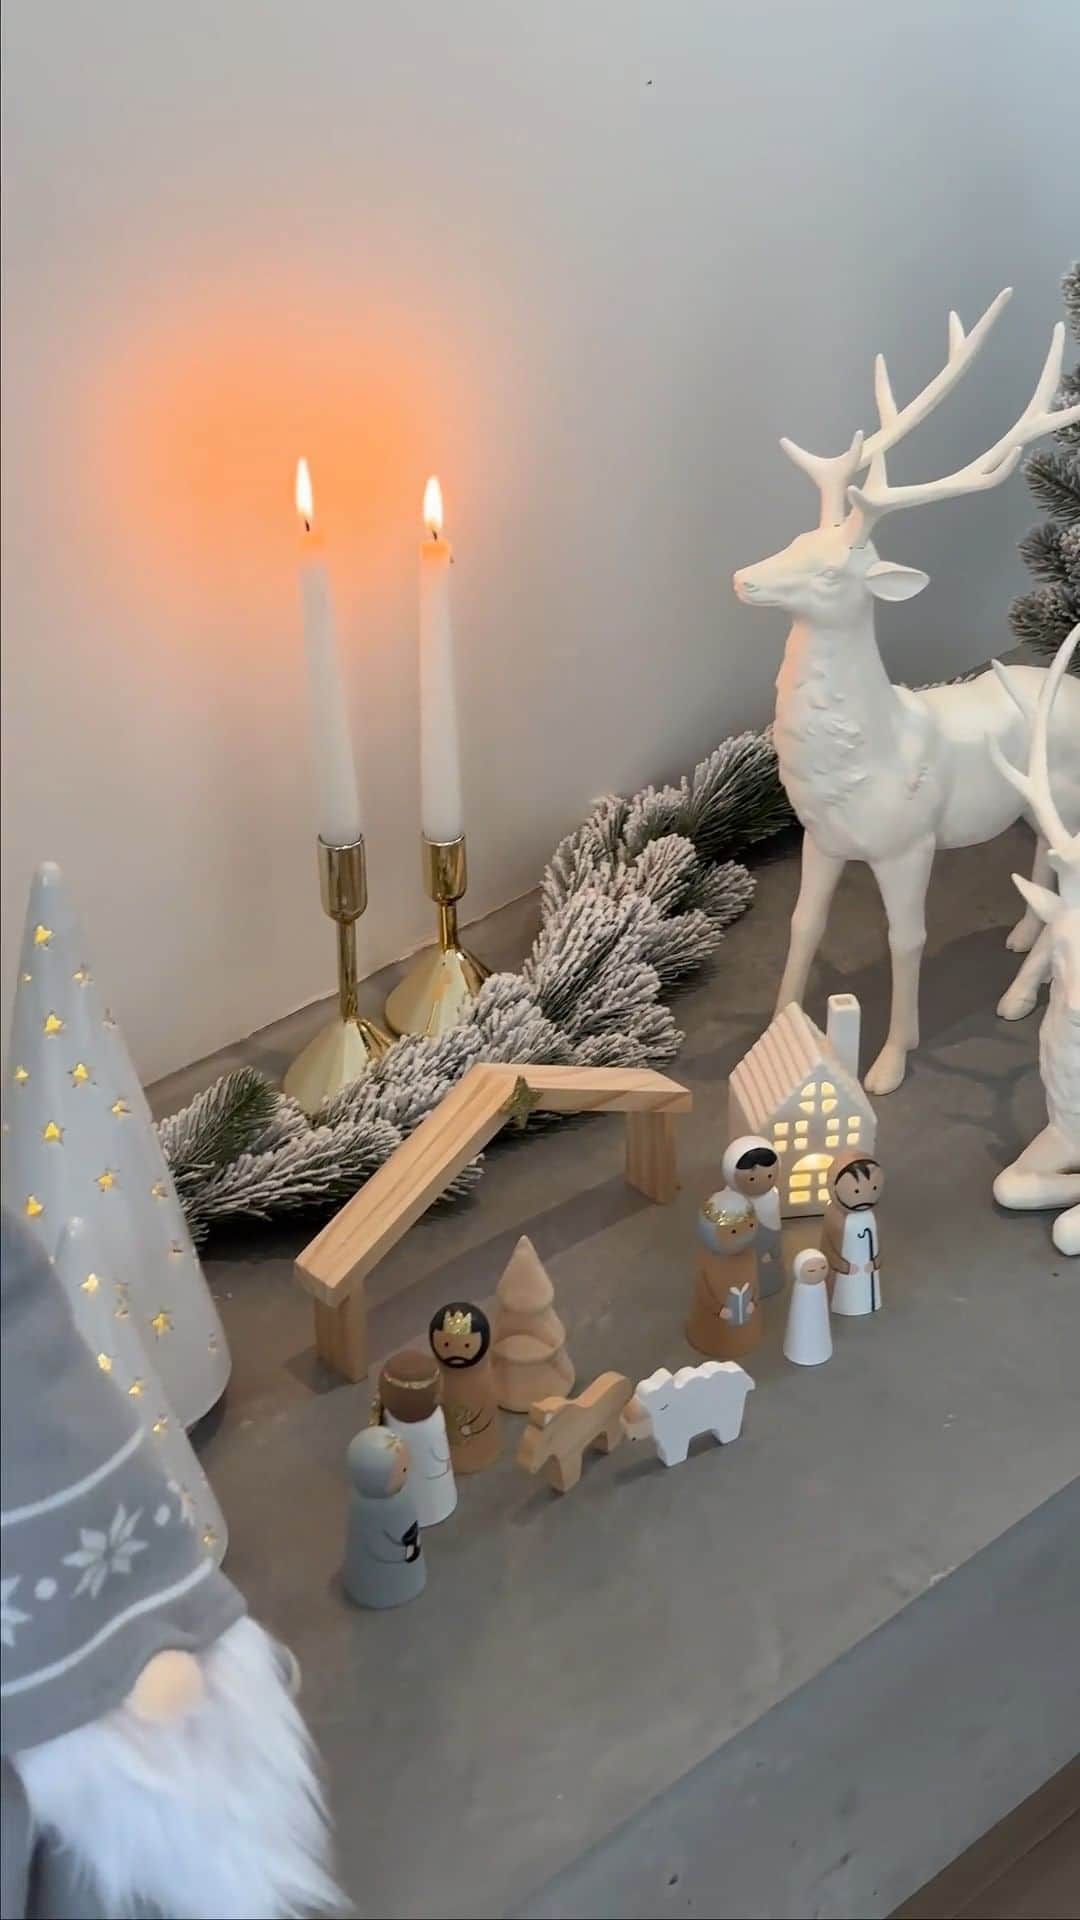 Target Australiaのインスタグラム：「Nordic Christmas styling inspo ❄️⛄  Our Christmas range is available to shop online & in store now.   Products featured  - Christmas Table Top Resin Reindeer - Christmas Table Top Resin Reindeer - Layering - Traditional Christmas Nativity Scene - Gifting Glass Candle Holder Set - Ceramic LED Christmas Tree - Large & Small - Large LED Ceramic Nordic House - Small LED Ceramic Nordic House - Snowy LED Christmas Garland - Tabletop Frosted Christmas Tree」